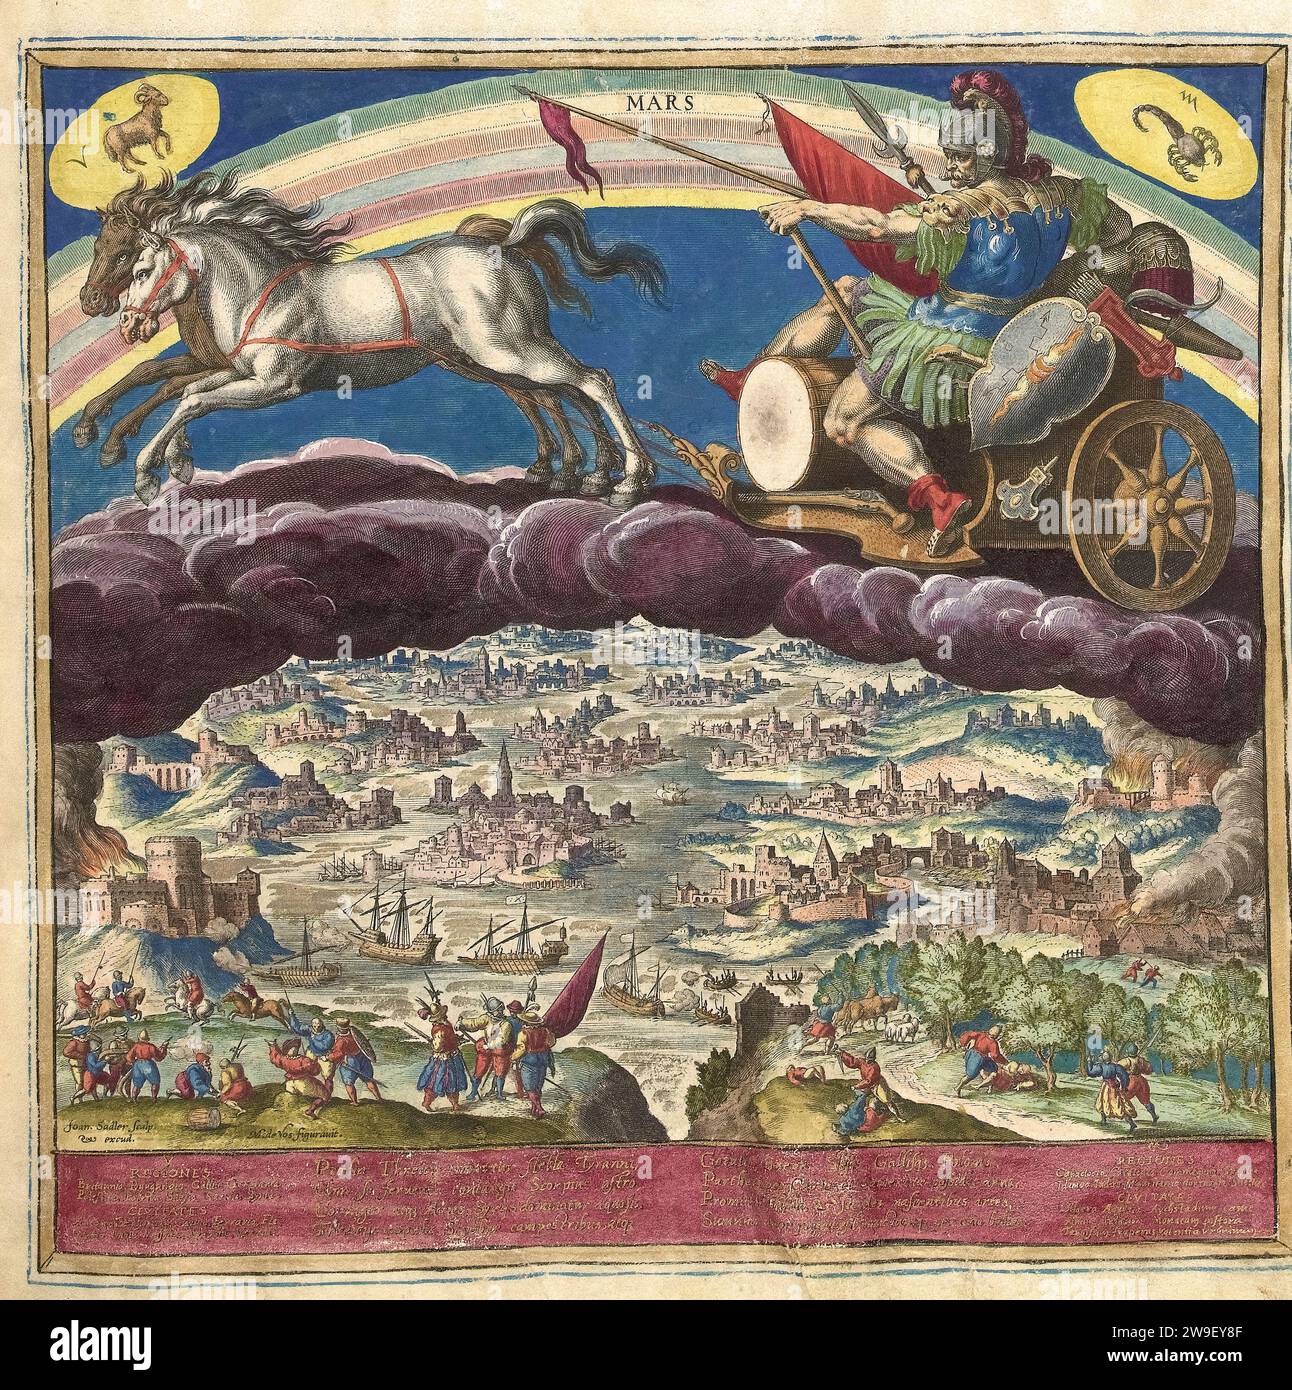 The planet Mars and its influence on the world The Seven Planets (series title) Planetarum effectus et eorum in signis zodiaci (series title) 1585 by  Maerten de Vos -  The god Mars on his chariot, drawn by two horses, riding on the clouds. Top left the constellation Aries, top right the constellation Cancer. At the bottom a river landscape with fighting soldiers and burning cities. The performance includes a poem of praise in Latin about the influence of planet Jupiter on the regions of Europe (England, Italy, Germany, Spain). Stock Photo